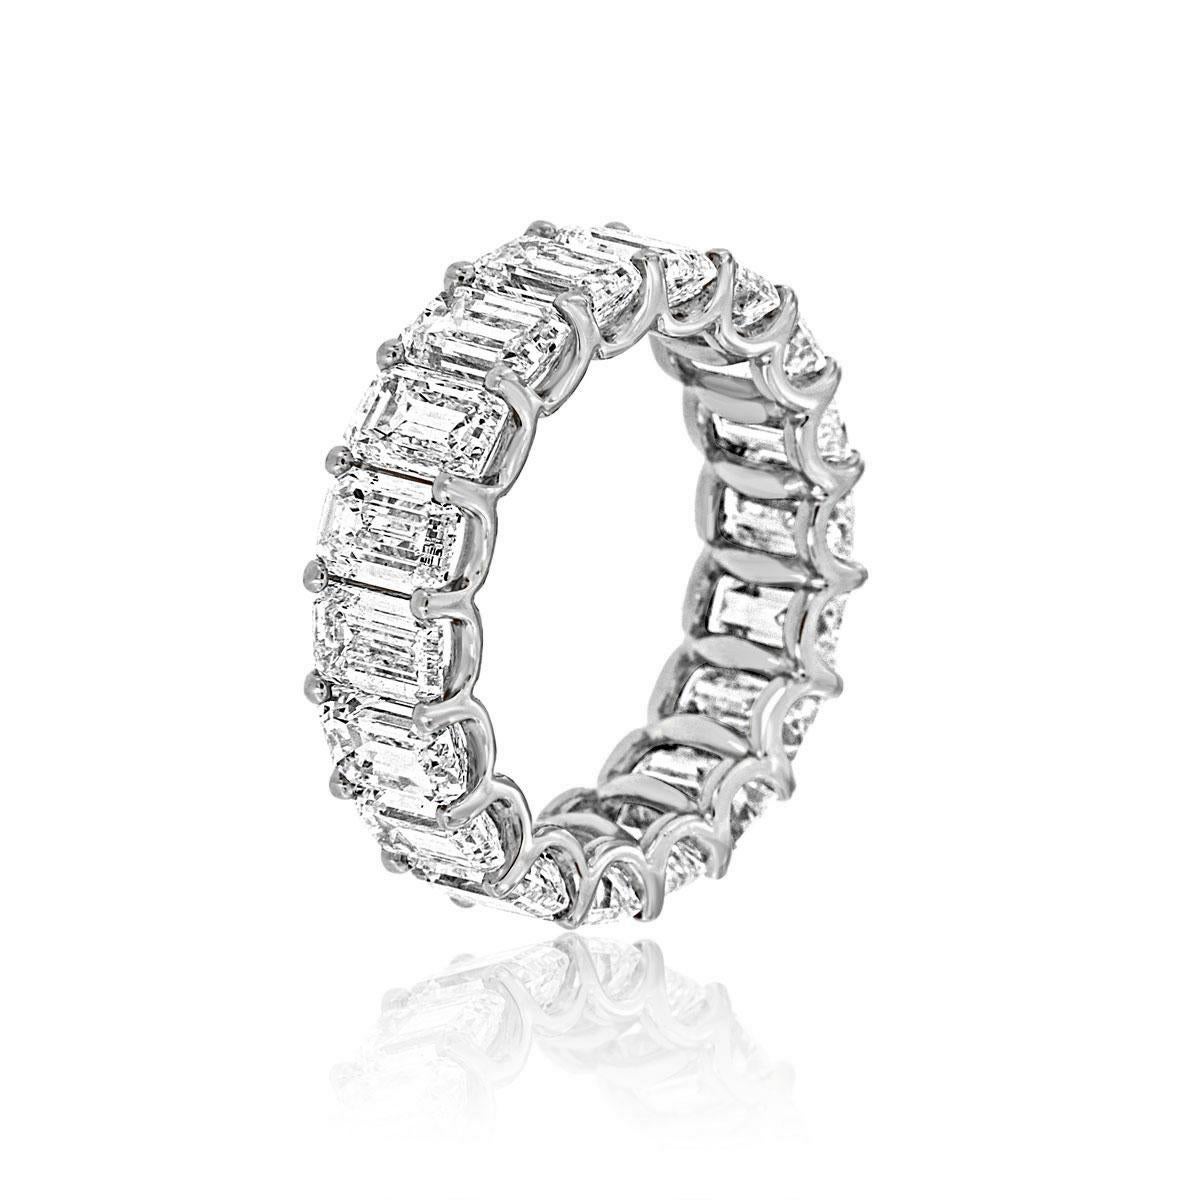 This Eternity Ring showcase perfectly matched 18 Emerald shape Natural Diamonds in a total weight of 9.50 carat set in a 